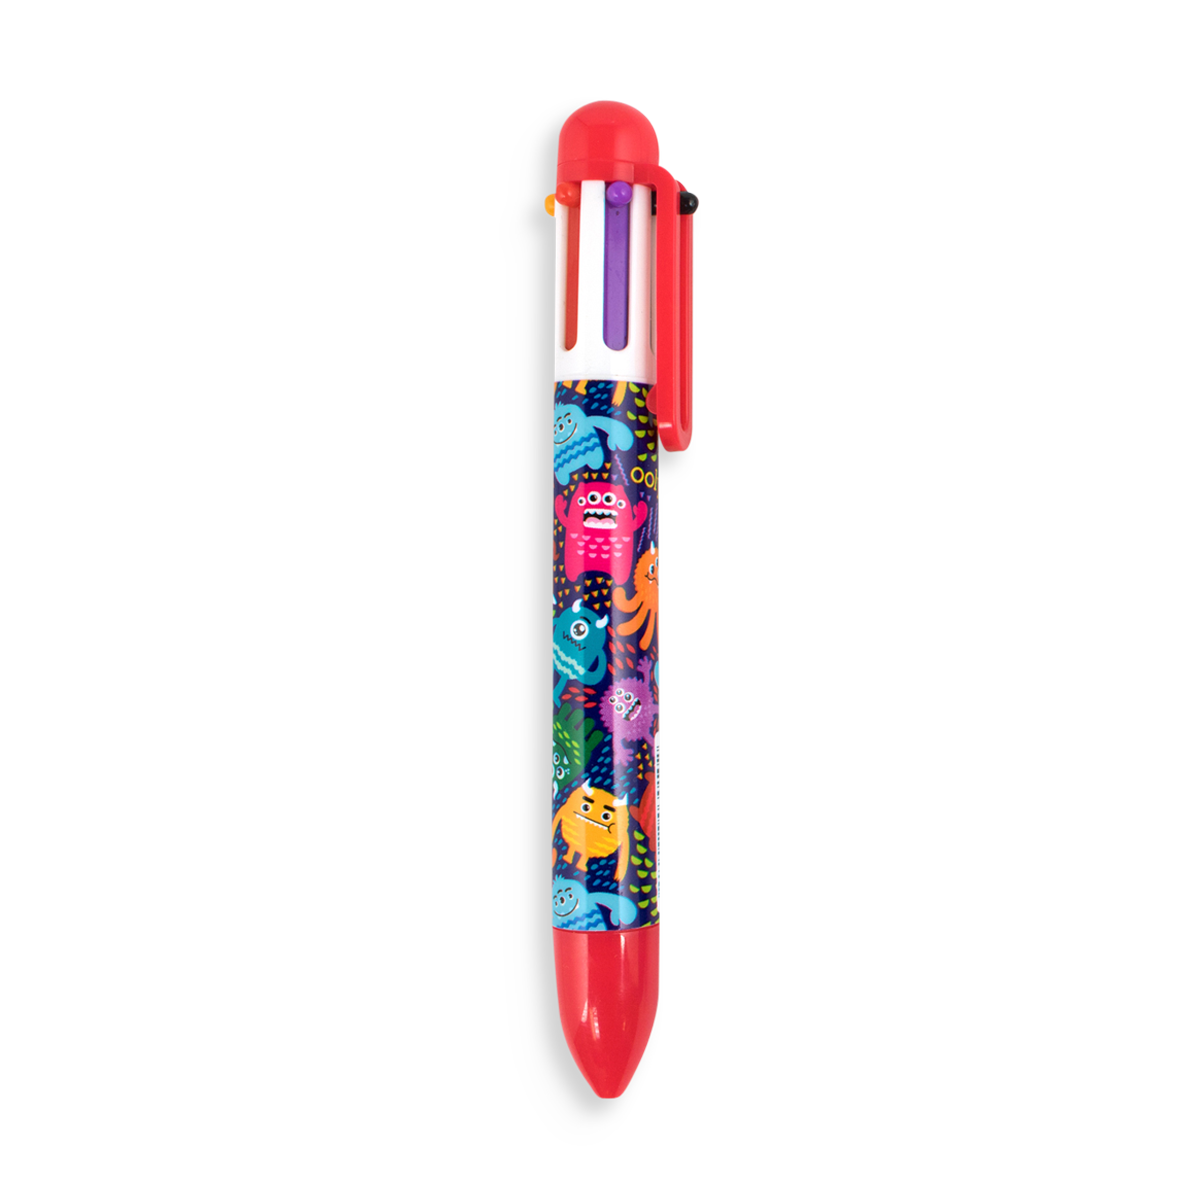 Red Monster 6 Click multi color pen with 6 different ink colors